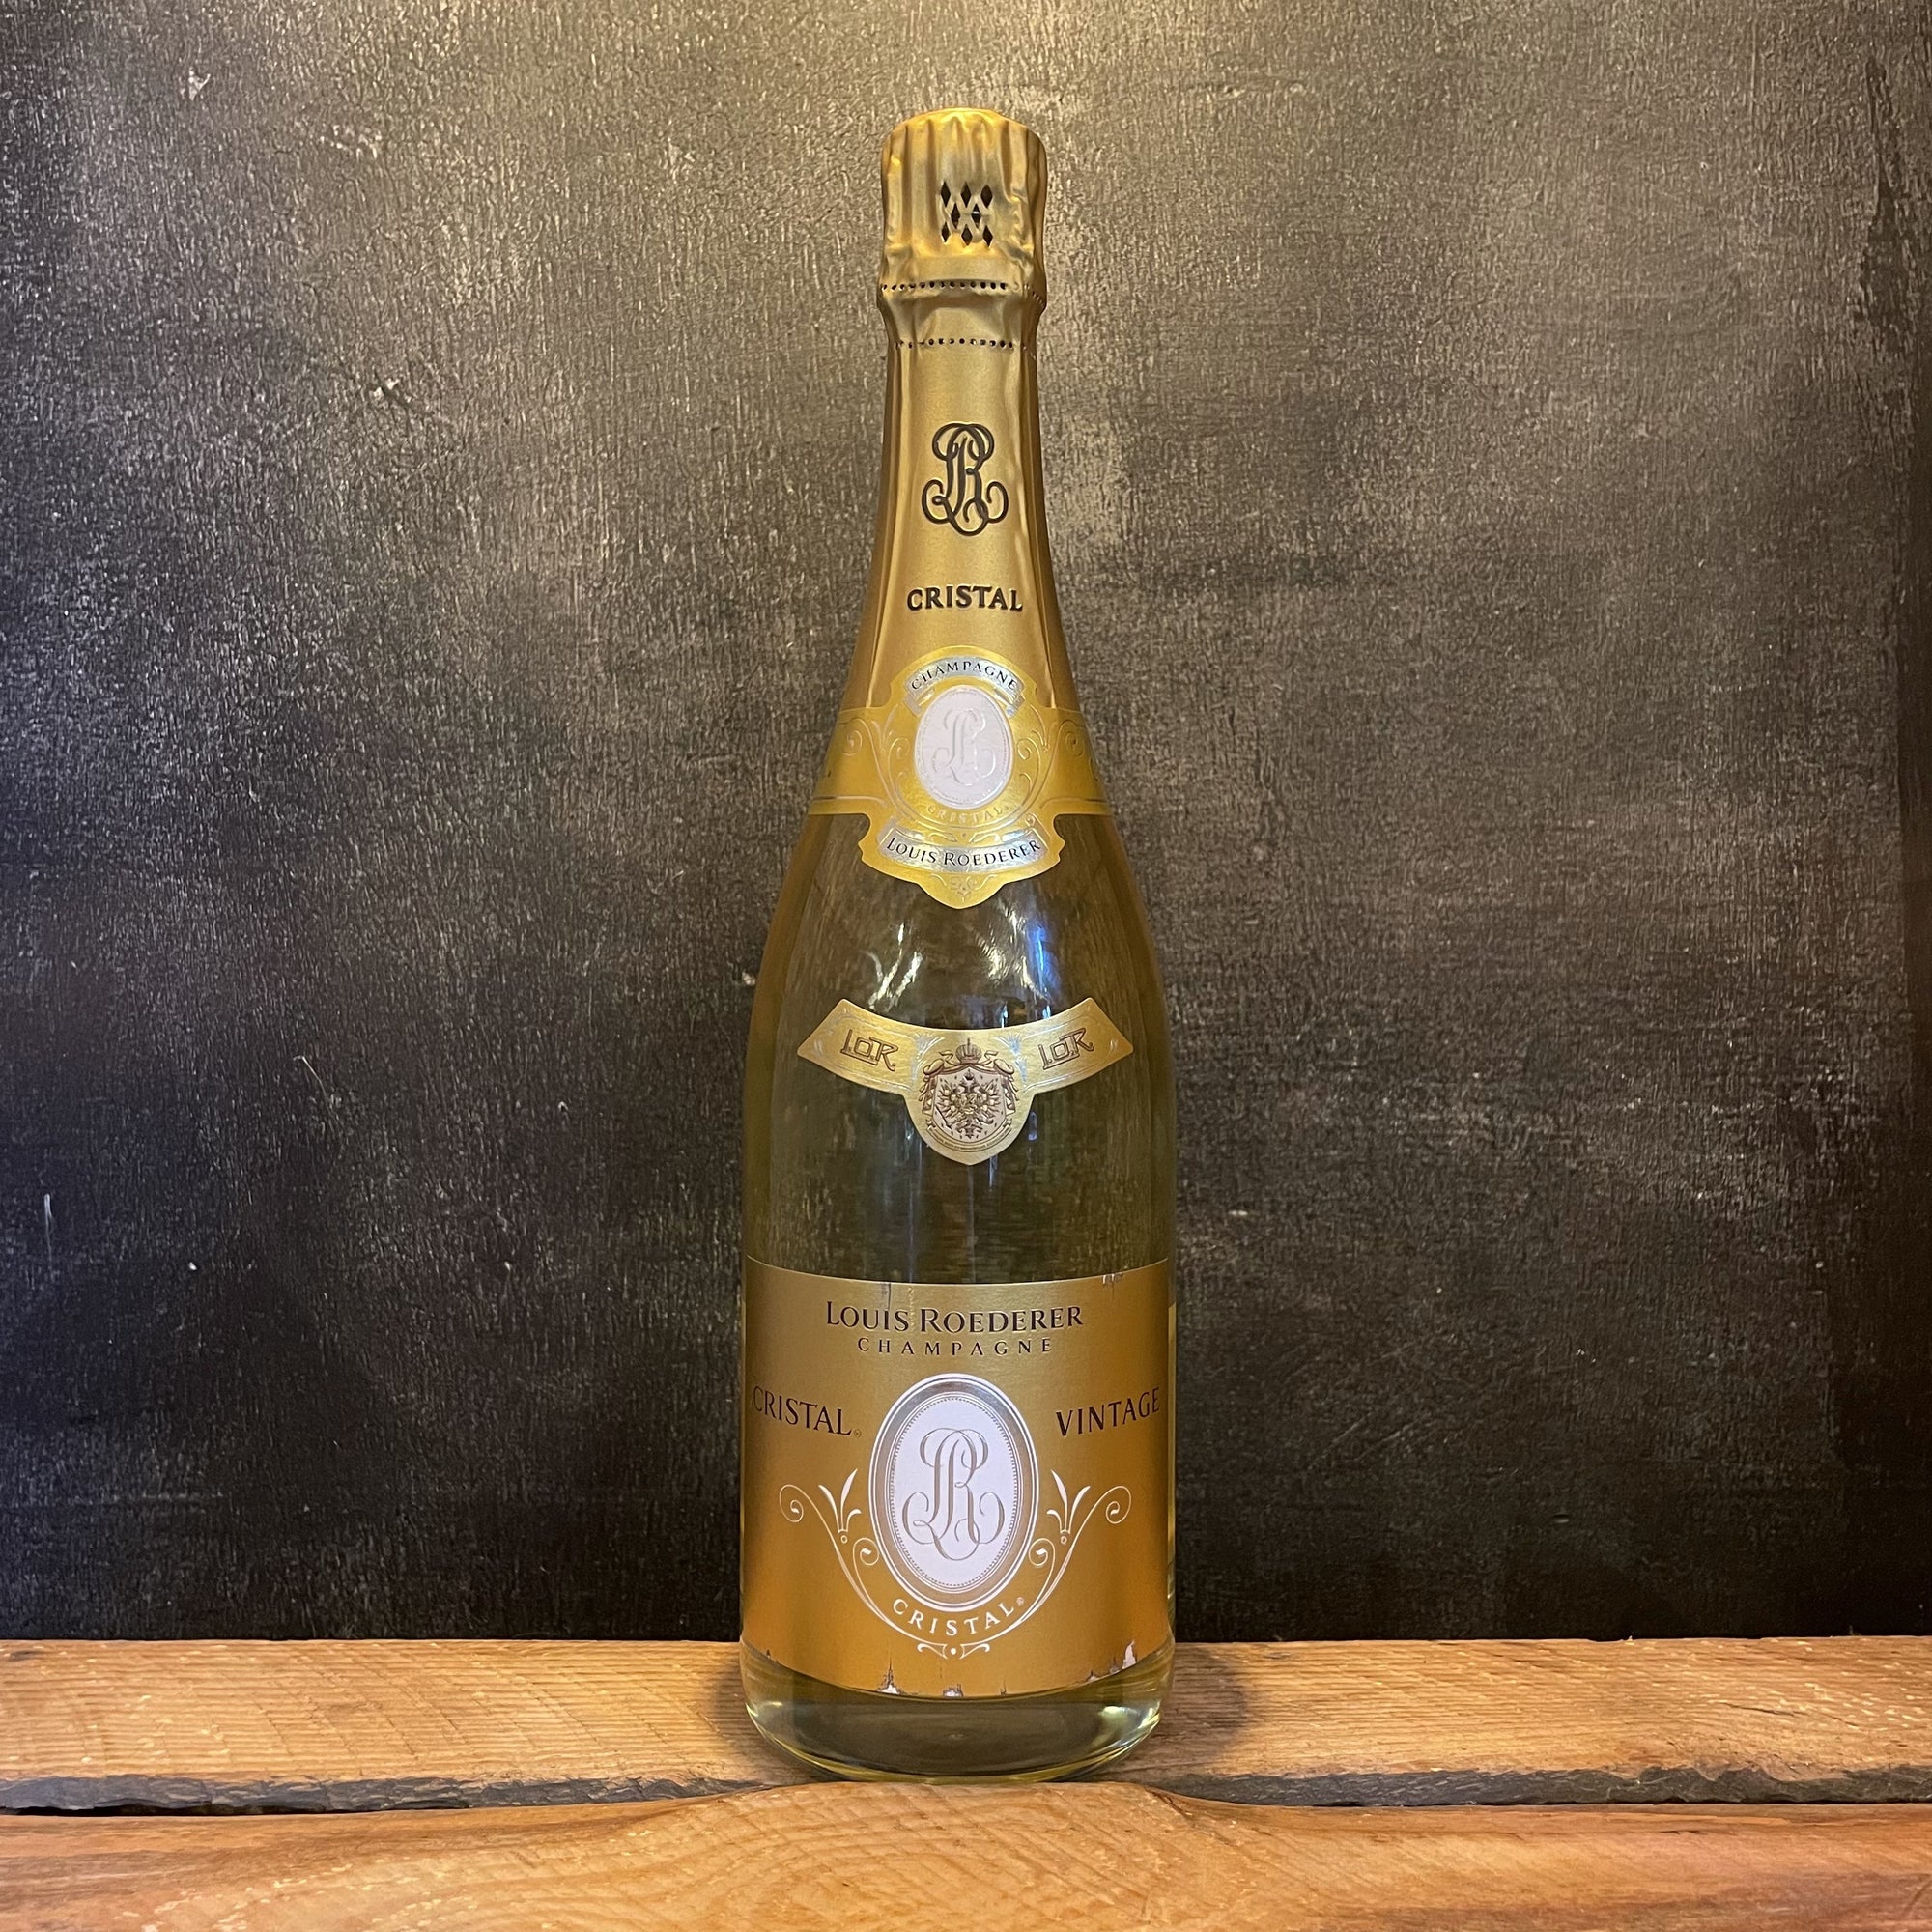 CHAMPAGNE - LOUIS ROEDERER - CRISTAL 2014